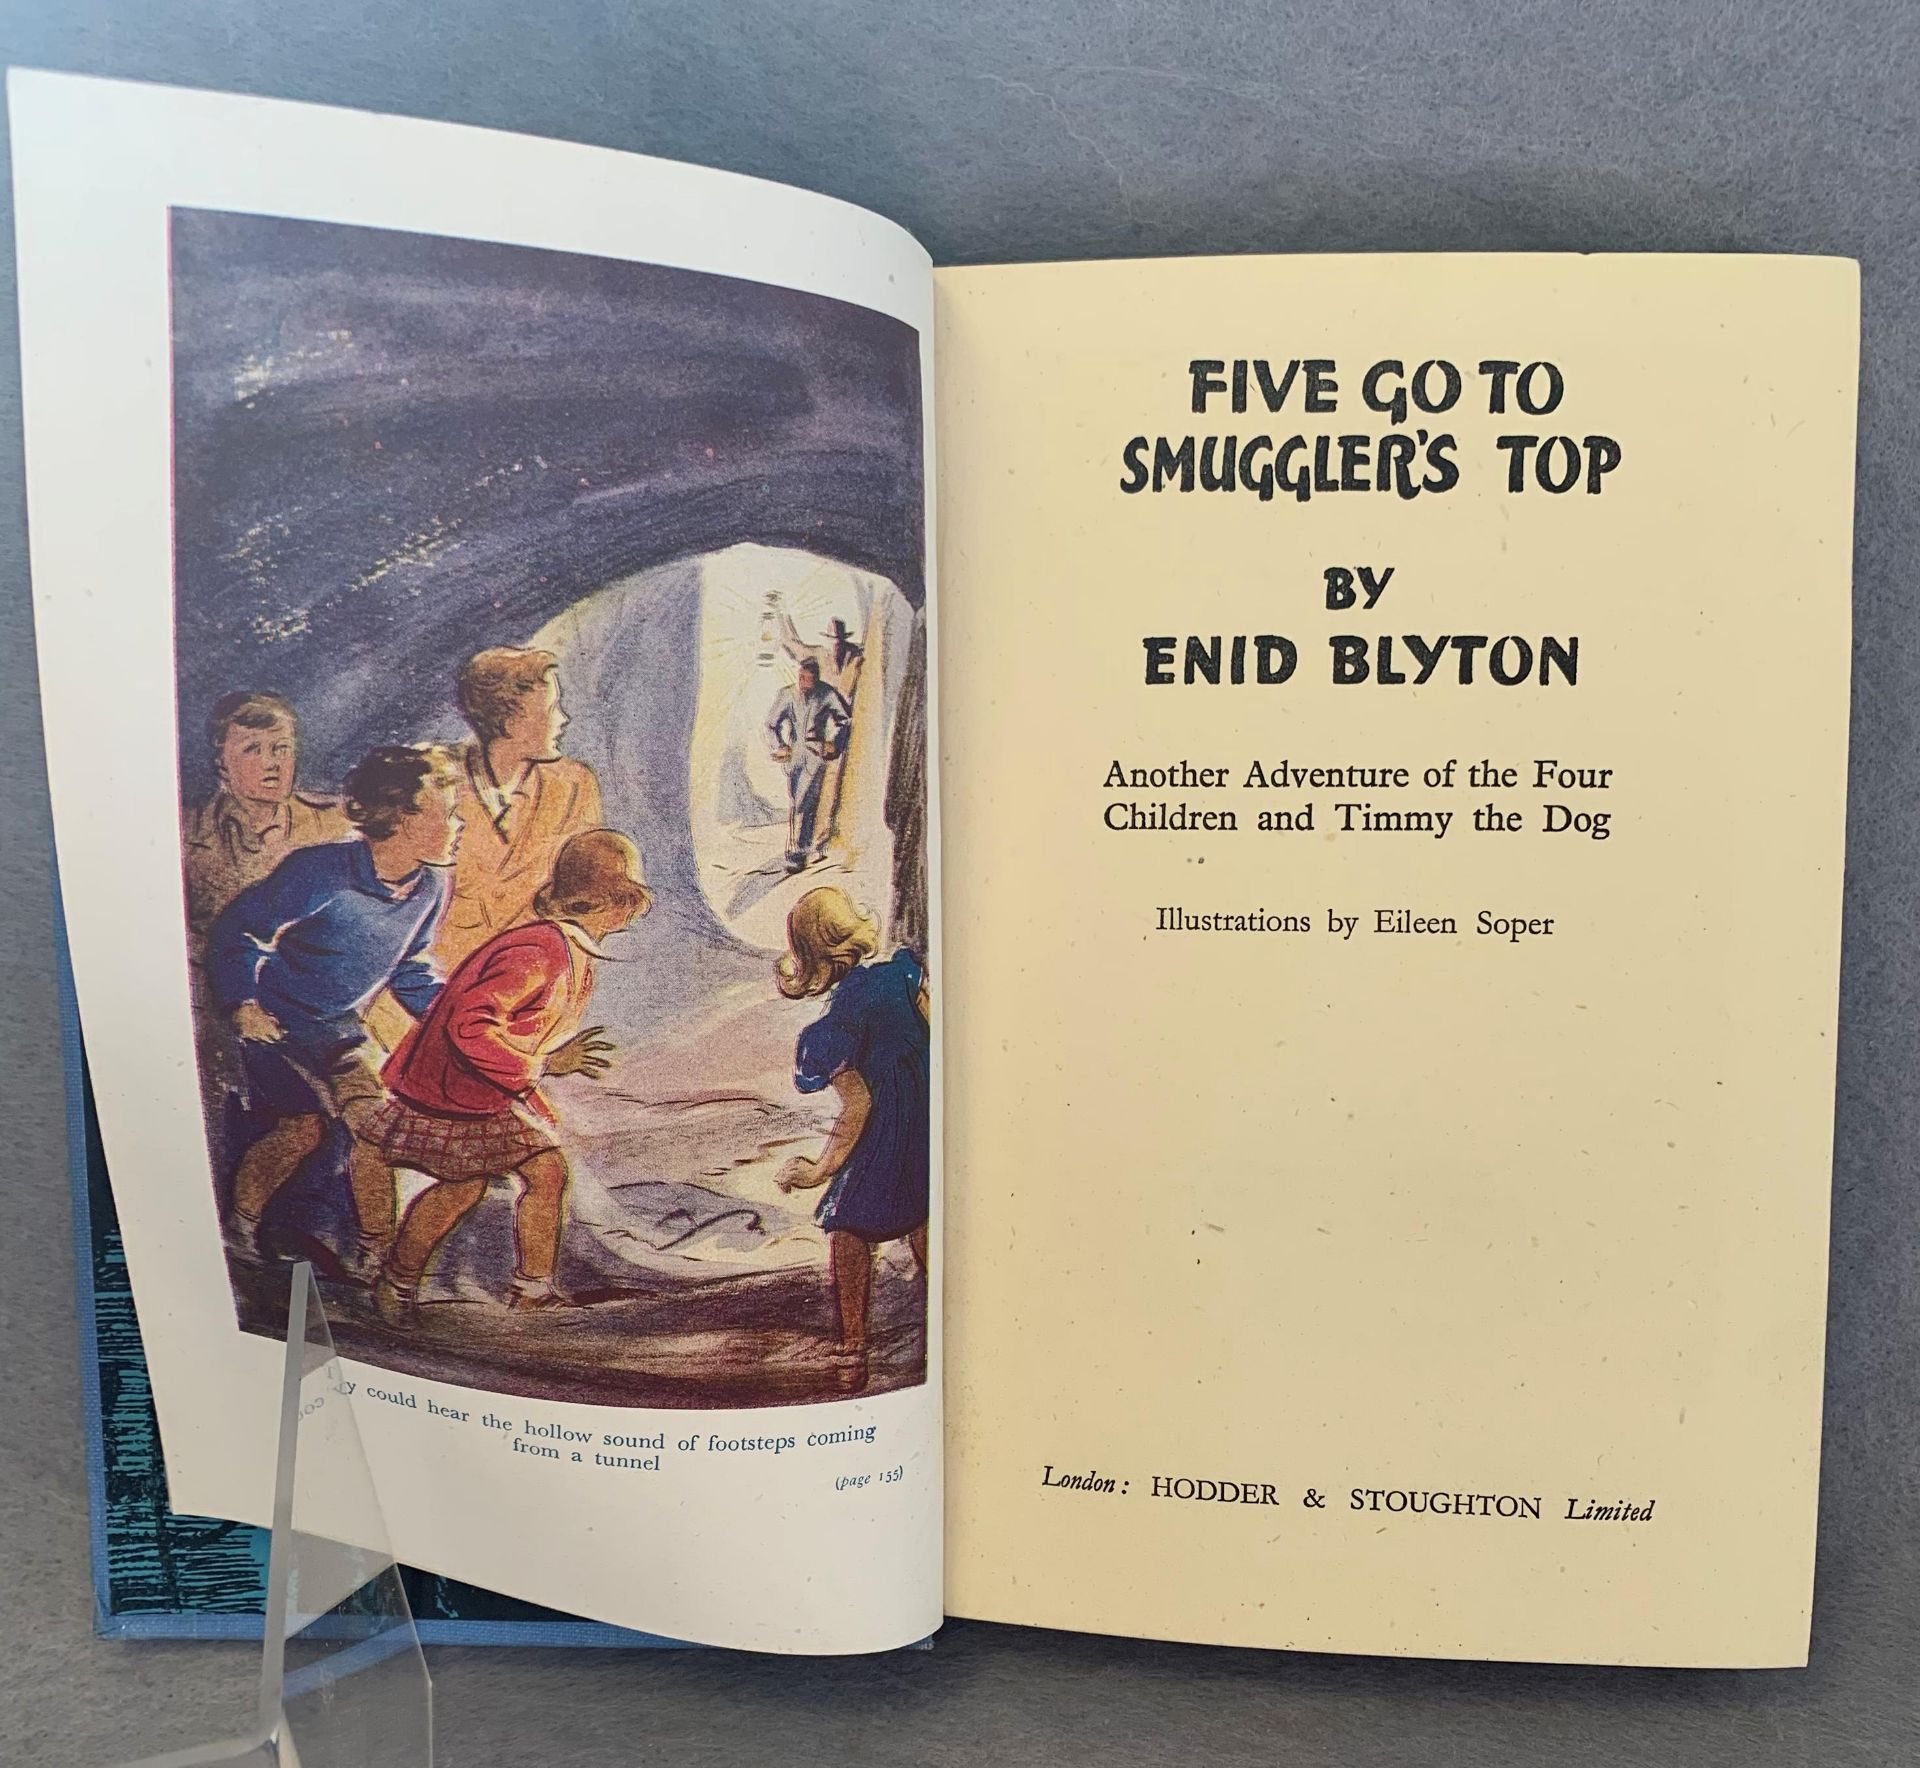 BLYTON, ENID, FIVE GO TO SMUGGLER'S TOP : ANOTHER ADVENTURE OF THE FOUR CHILDREN AND TIMMY THE DOG,